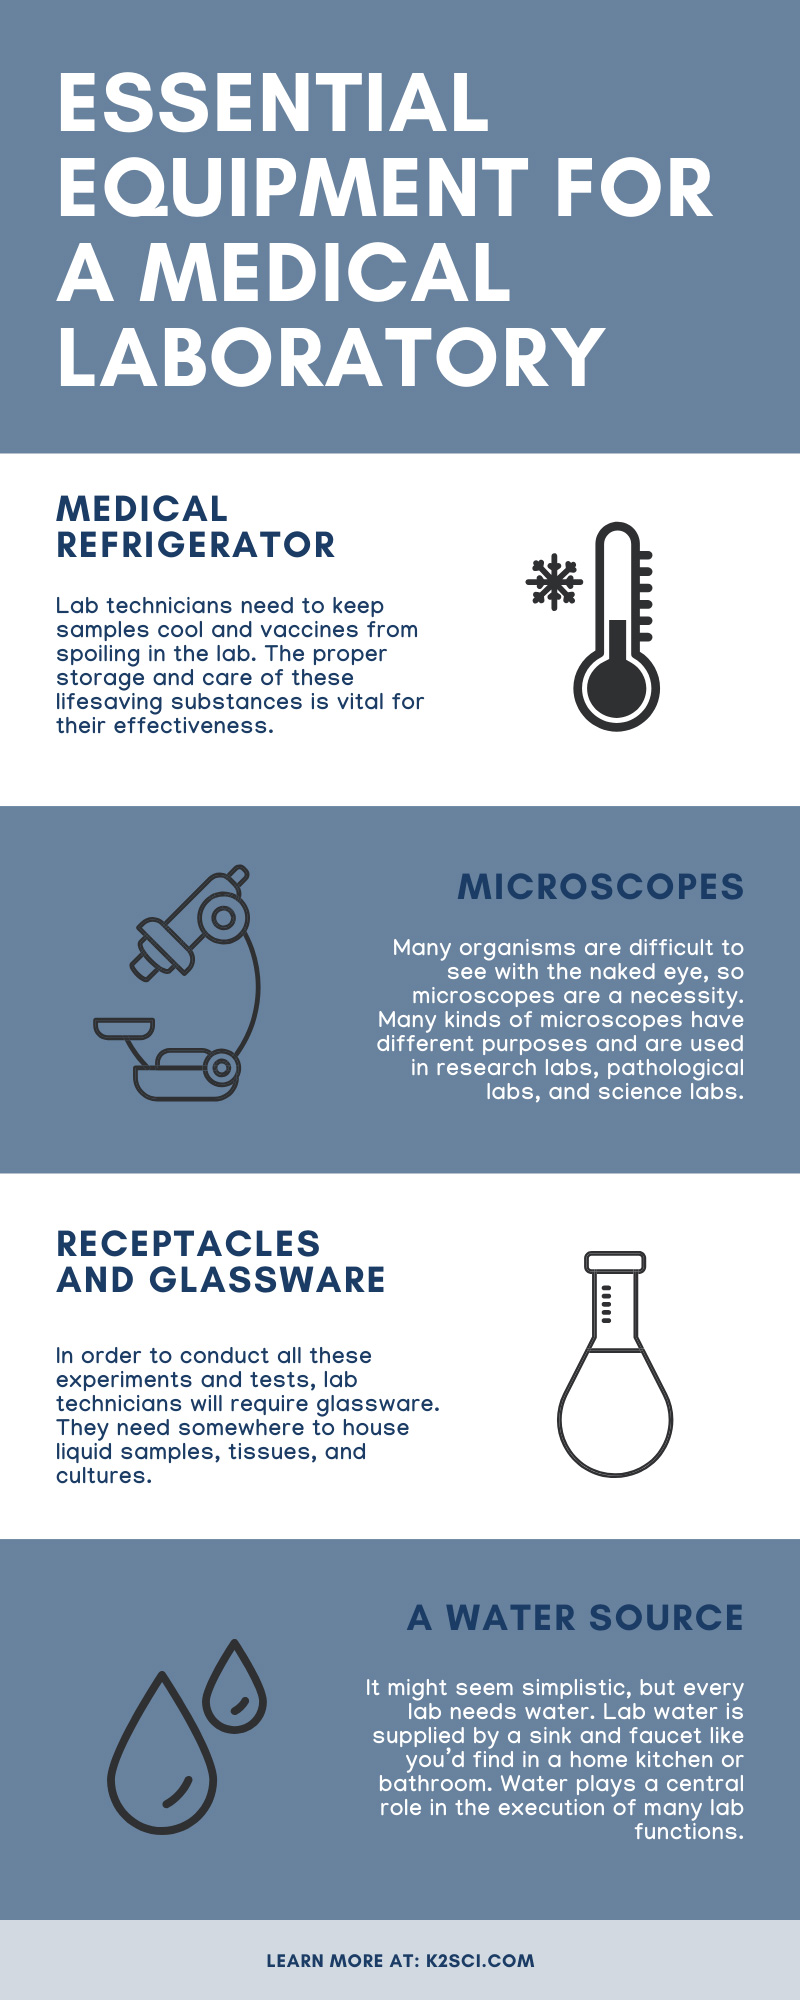 Essential Equipment for a Medical Laboratory